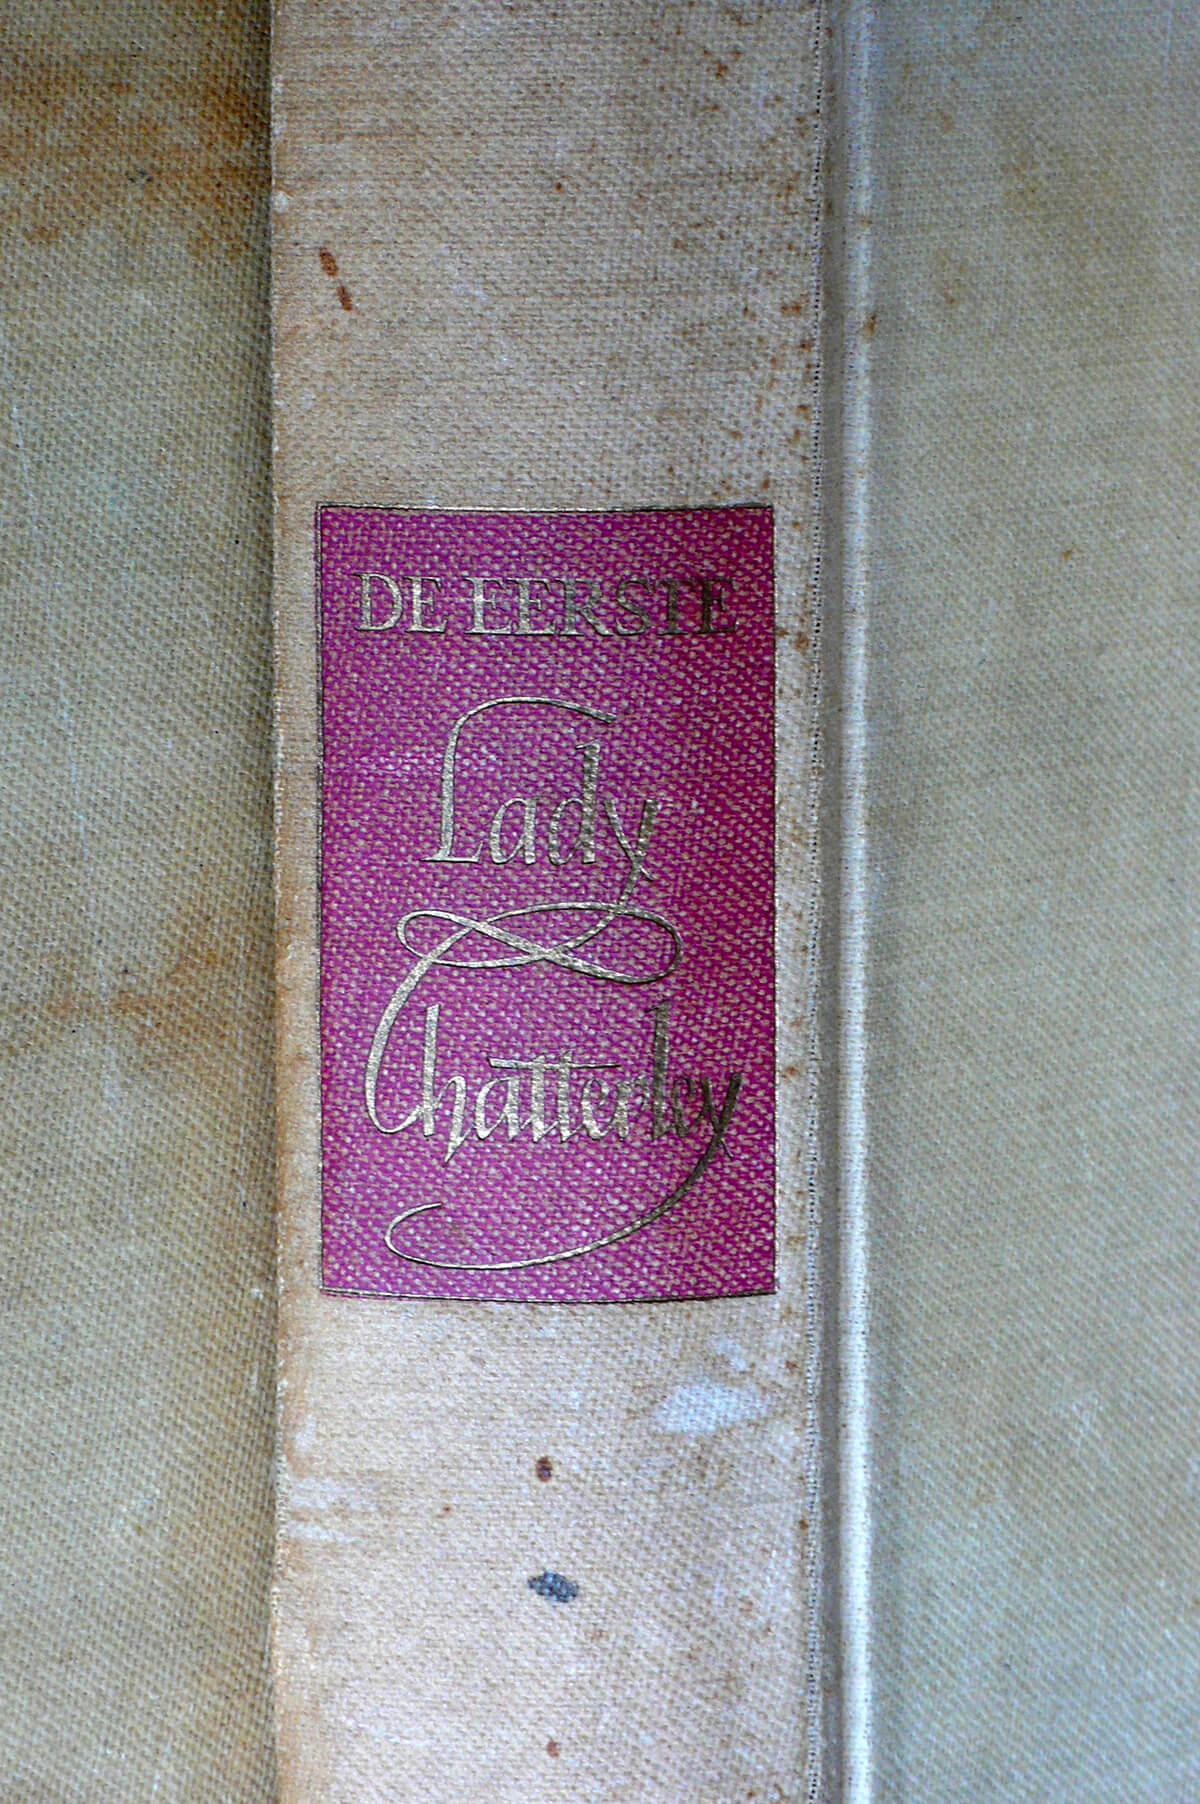 Lady Chatterley, 2017